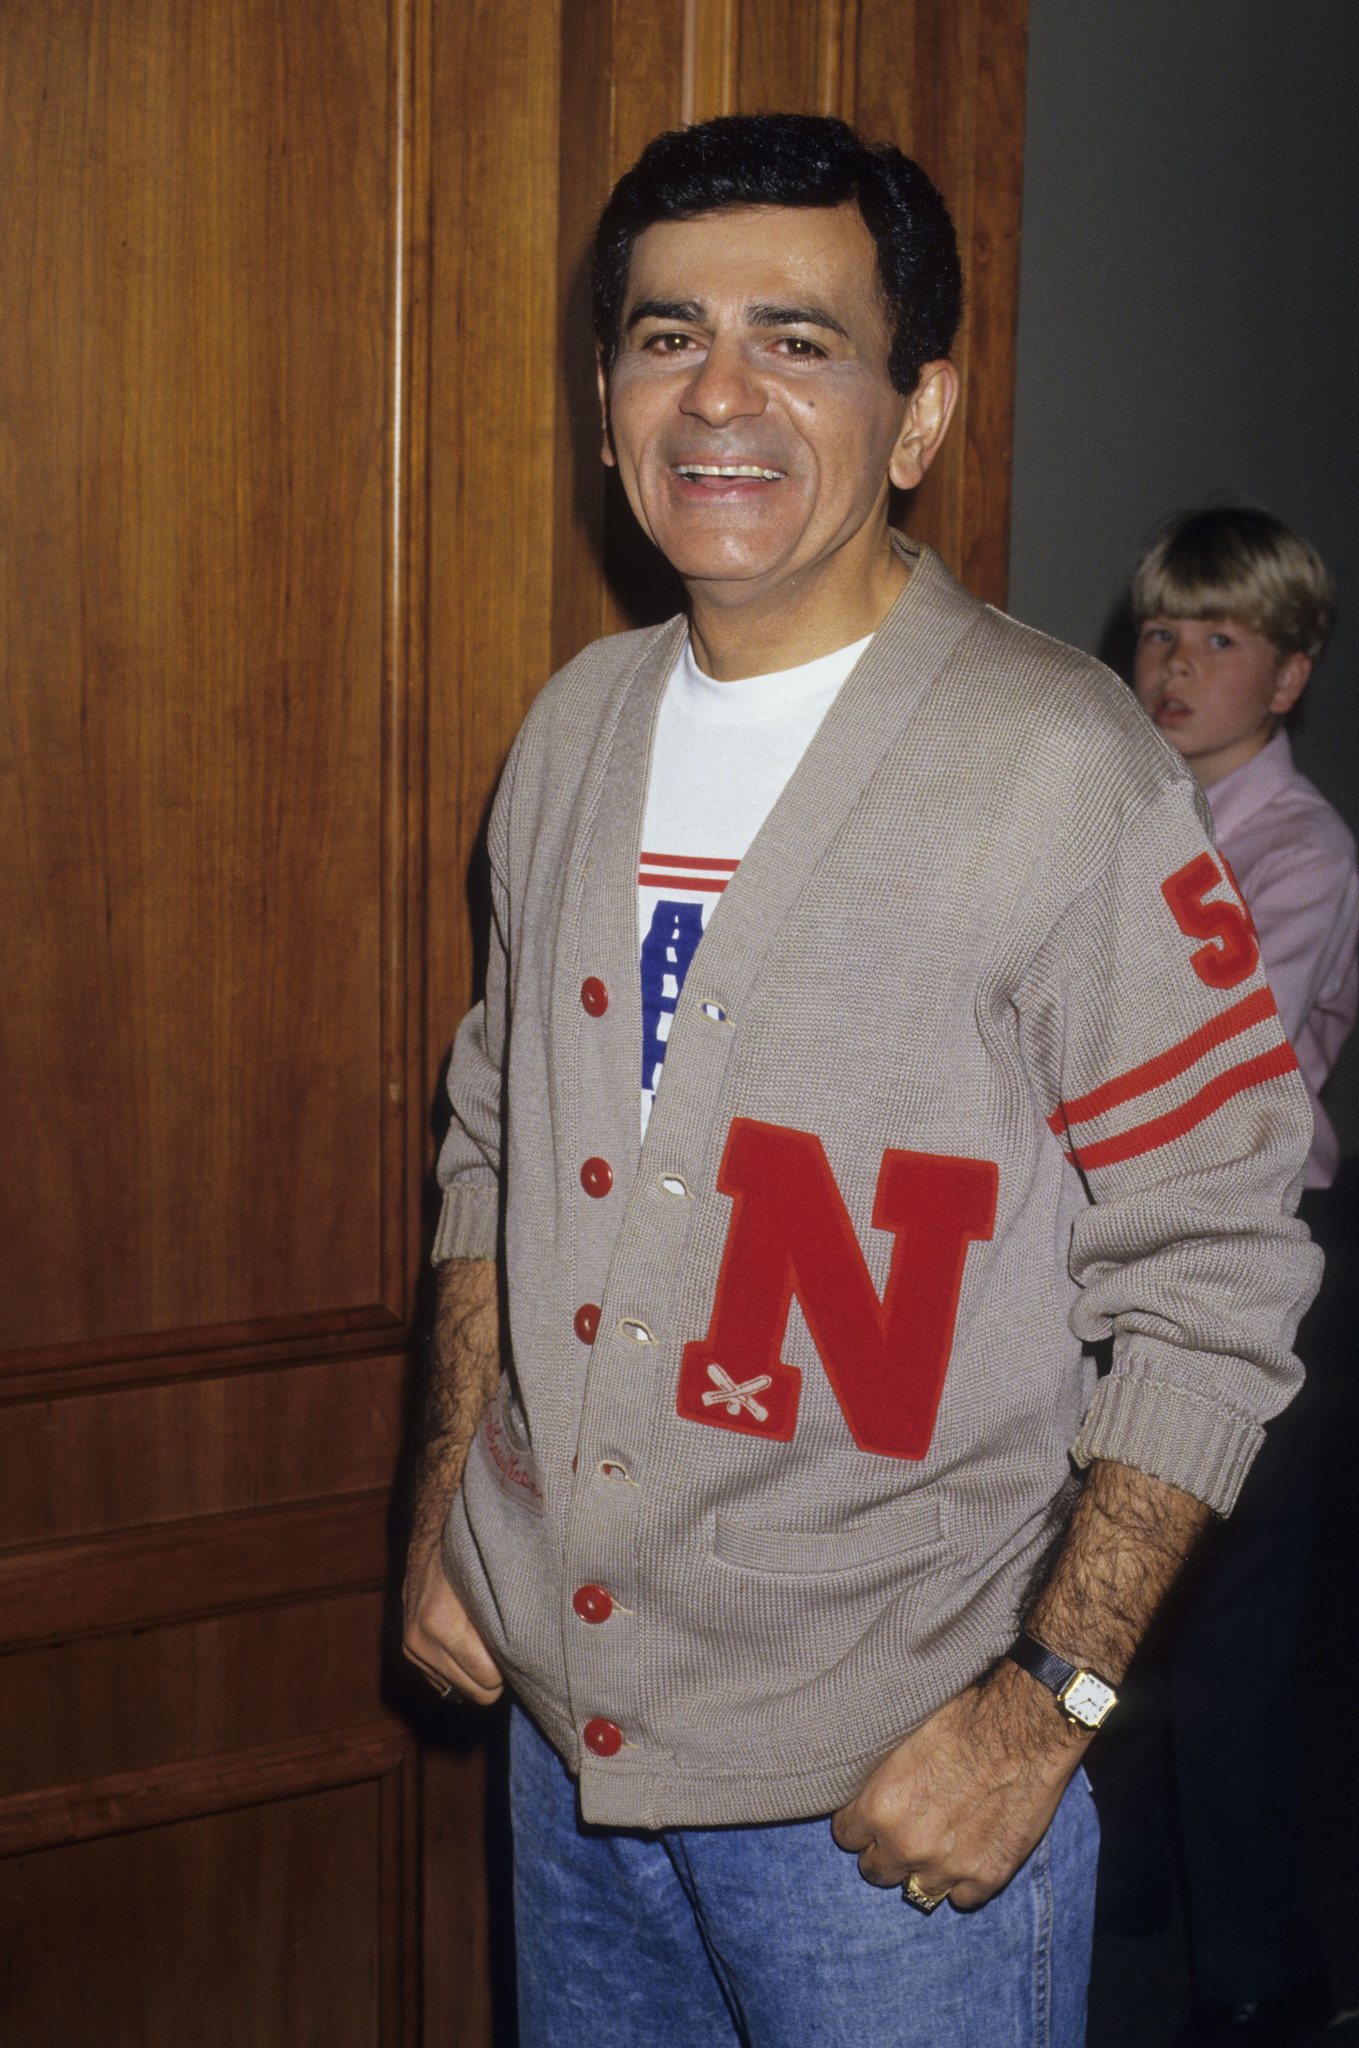 Radio Personality Casey Kasem attends Hans Christian Anderson Awards on March 15, 1987 at the Century Plaza Hotel in Century City, California.